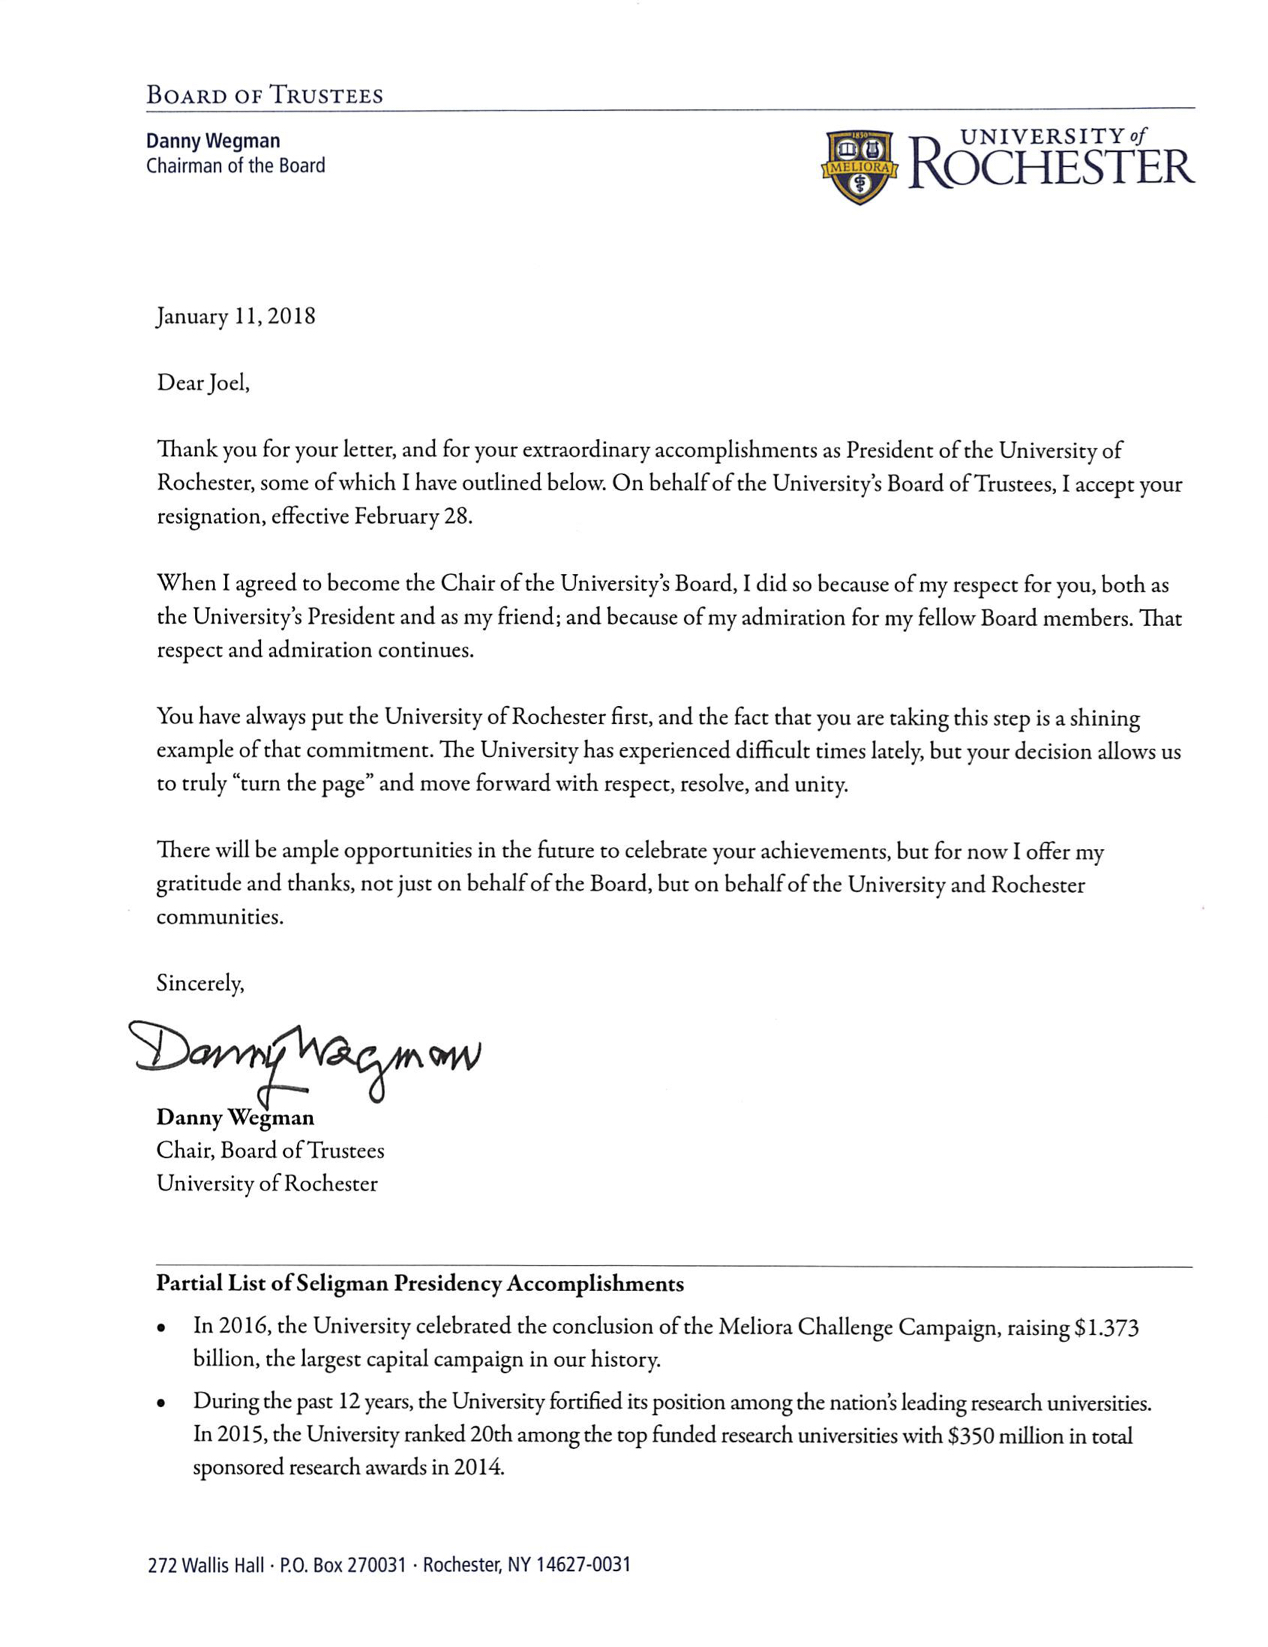 Letter from Danny Wegman, Chair, University of Rochester Board of Trustees